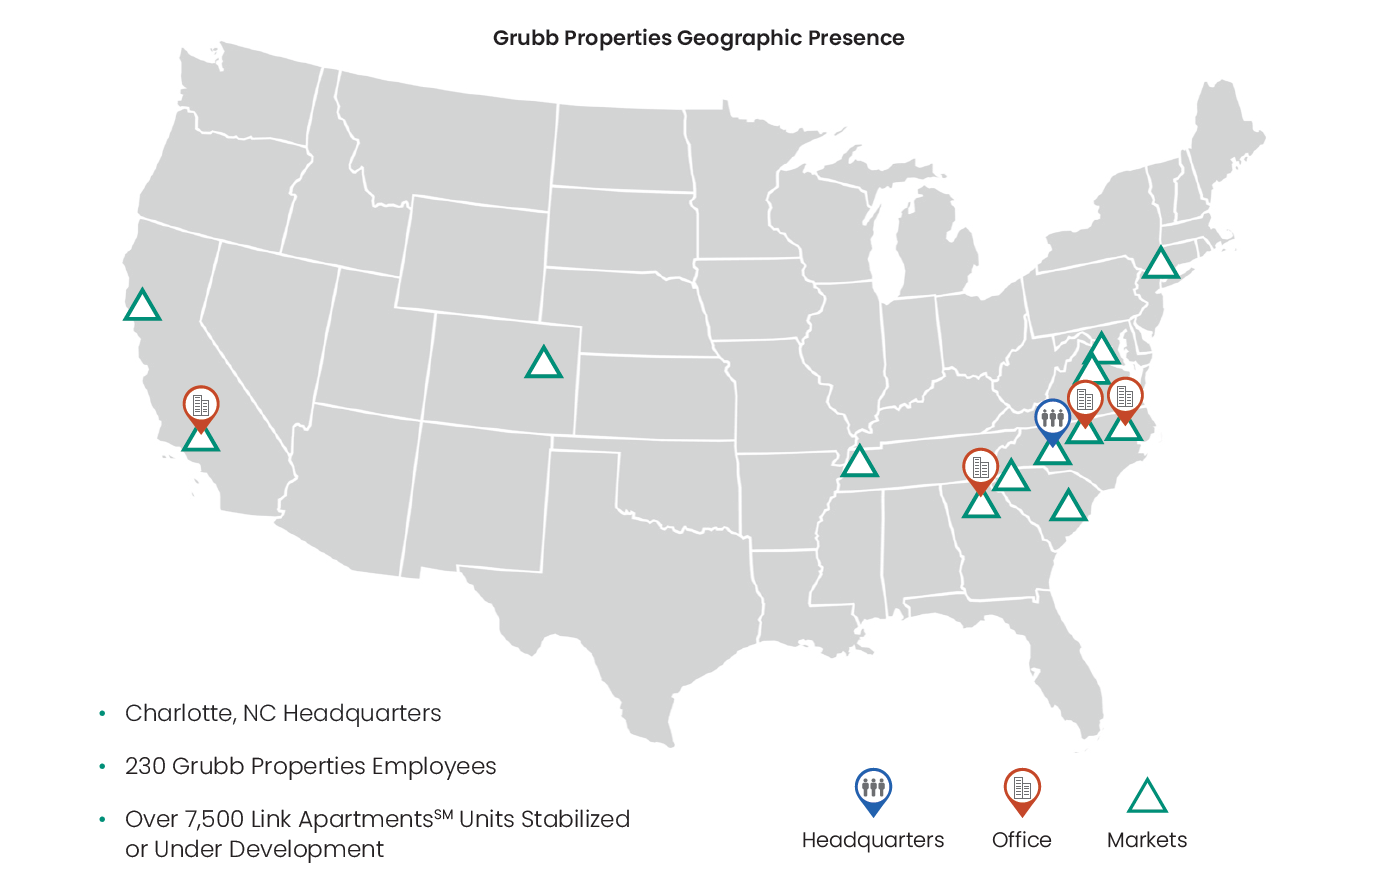 Grubb Properties Geographical Presence